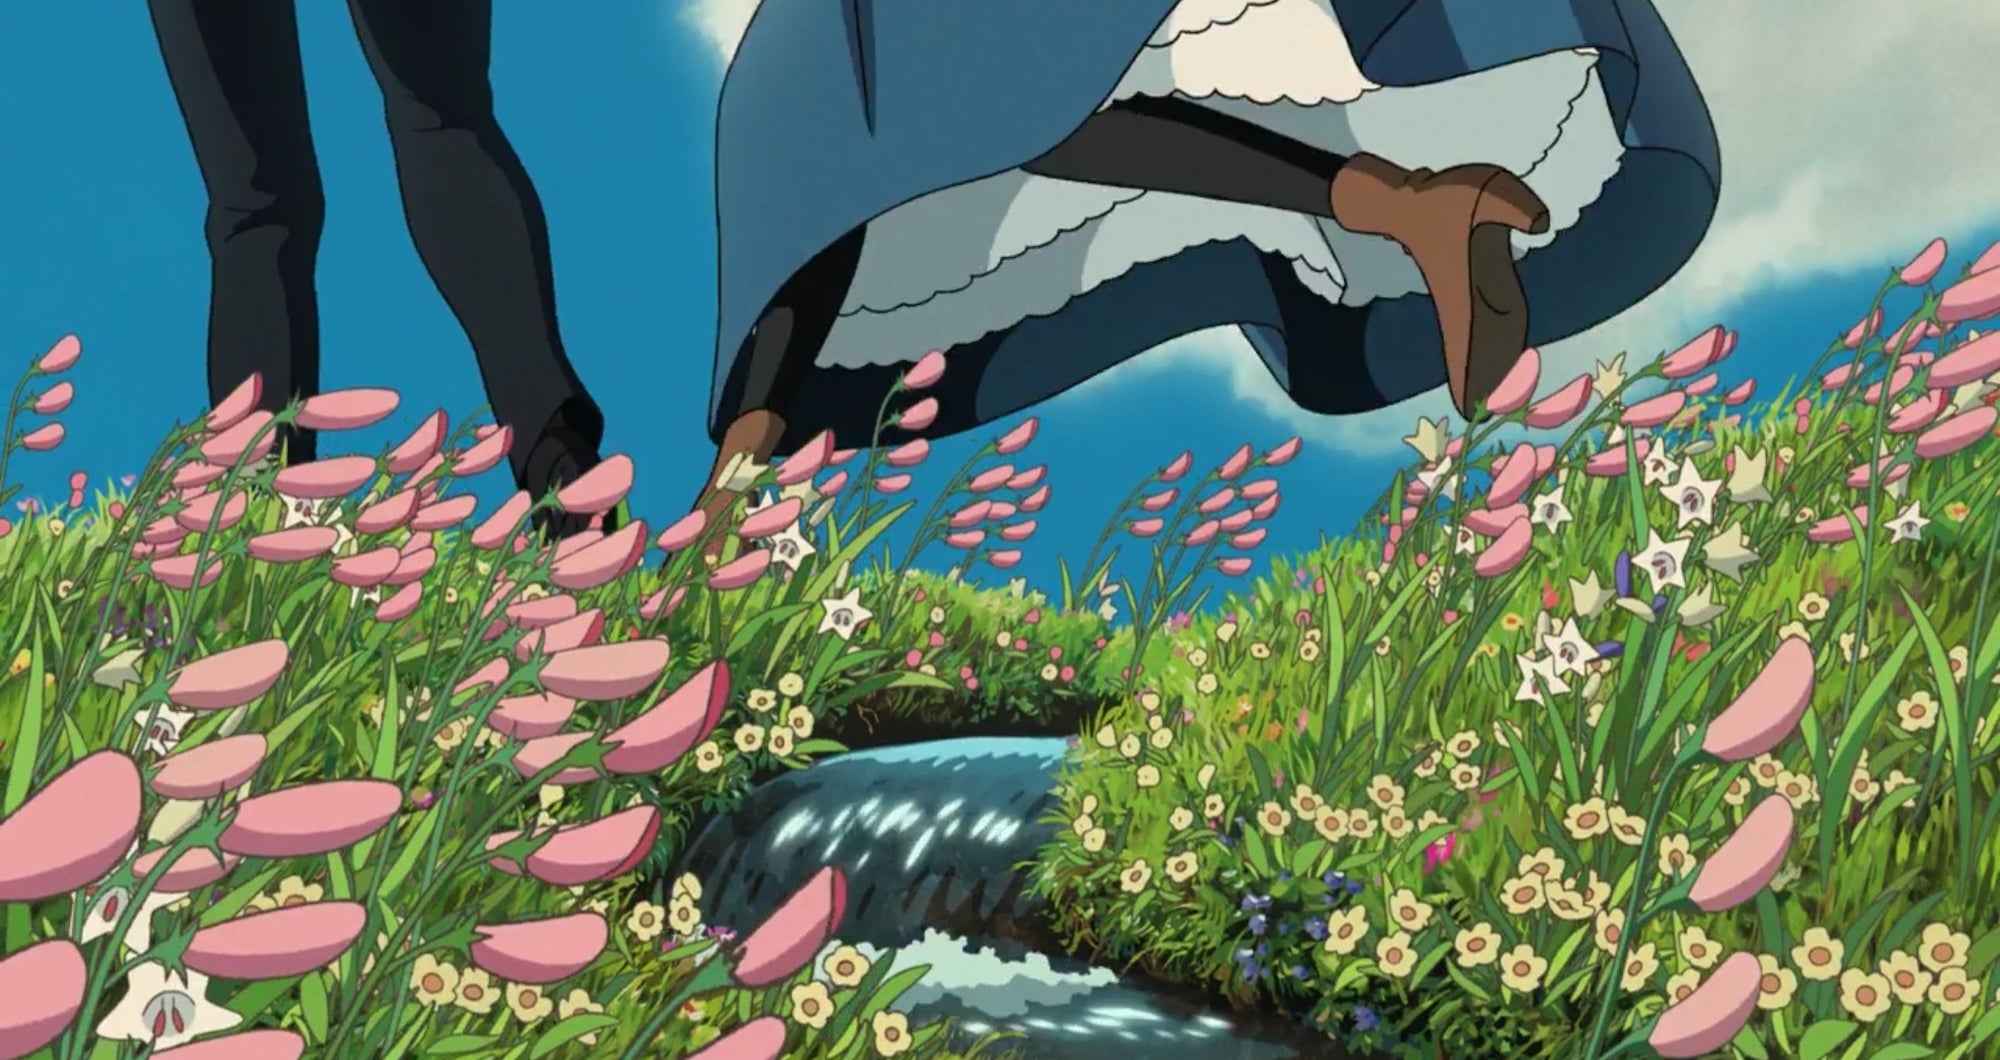 Two sets of feet jump over a small stream in the middle of a field of flowers